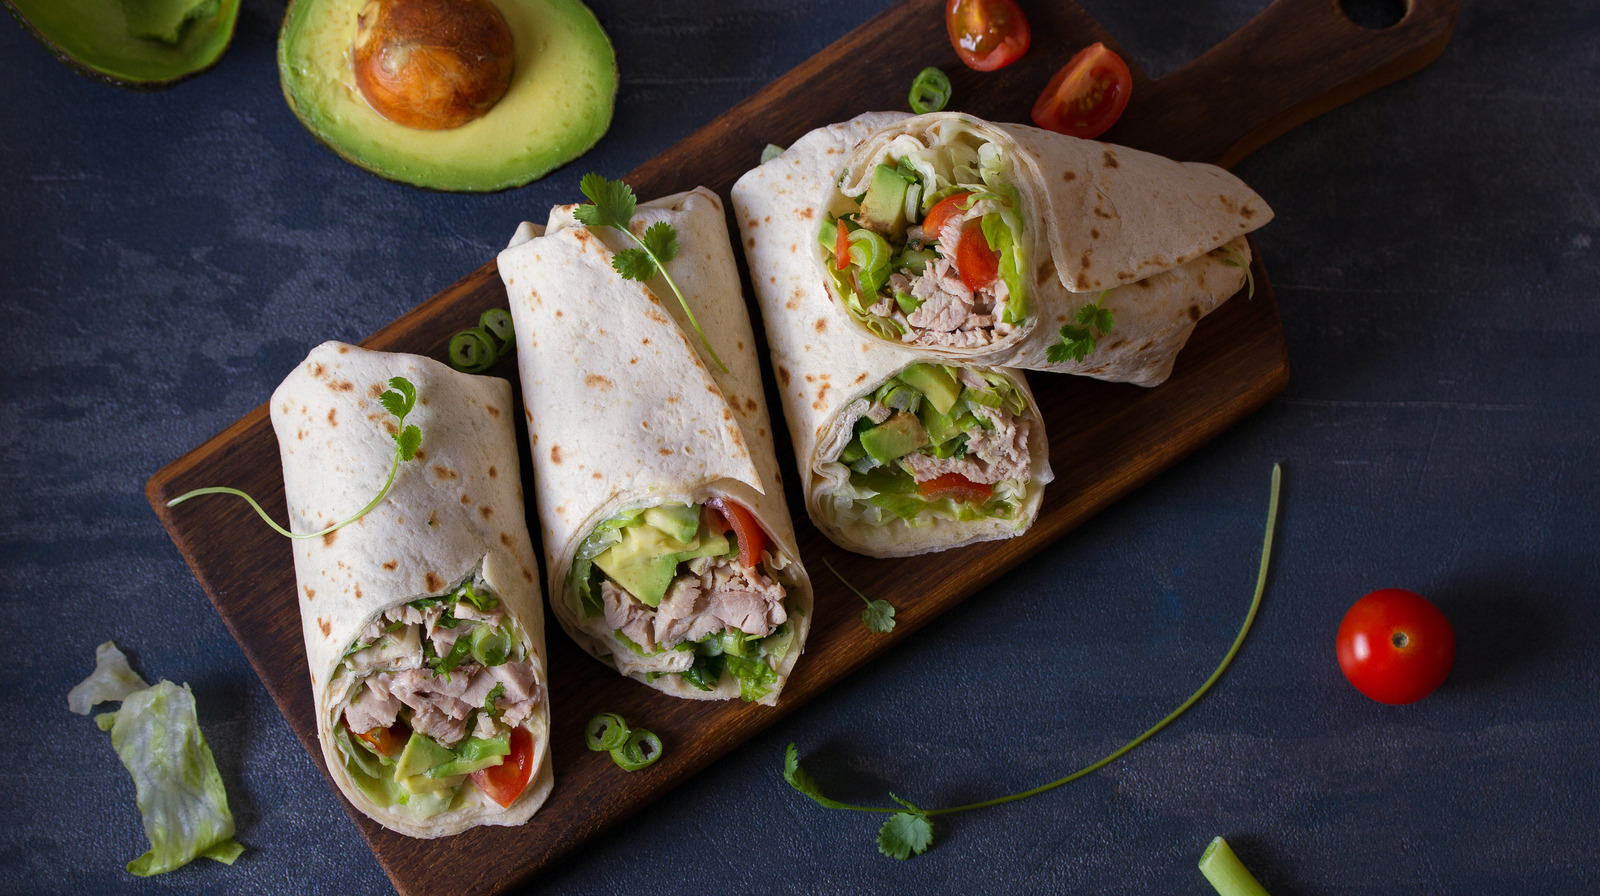 https://www.tastingtable.com/img/gallery/15-mistakes-to-avoid-with-wraps/l-intro-1665094704.jpg